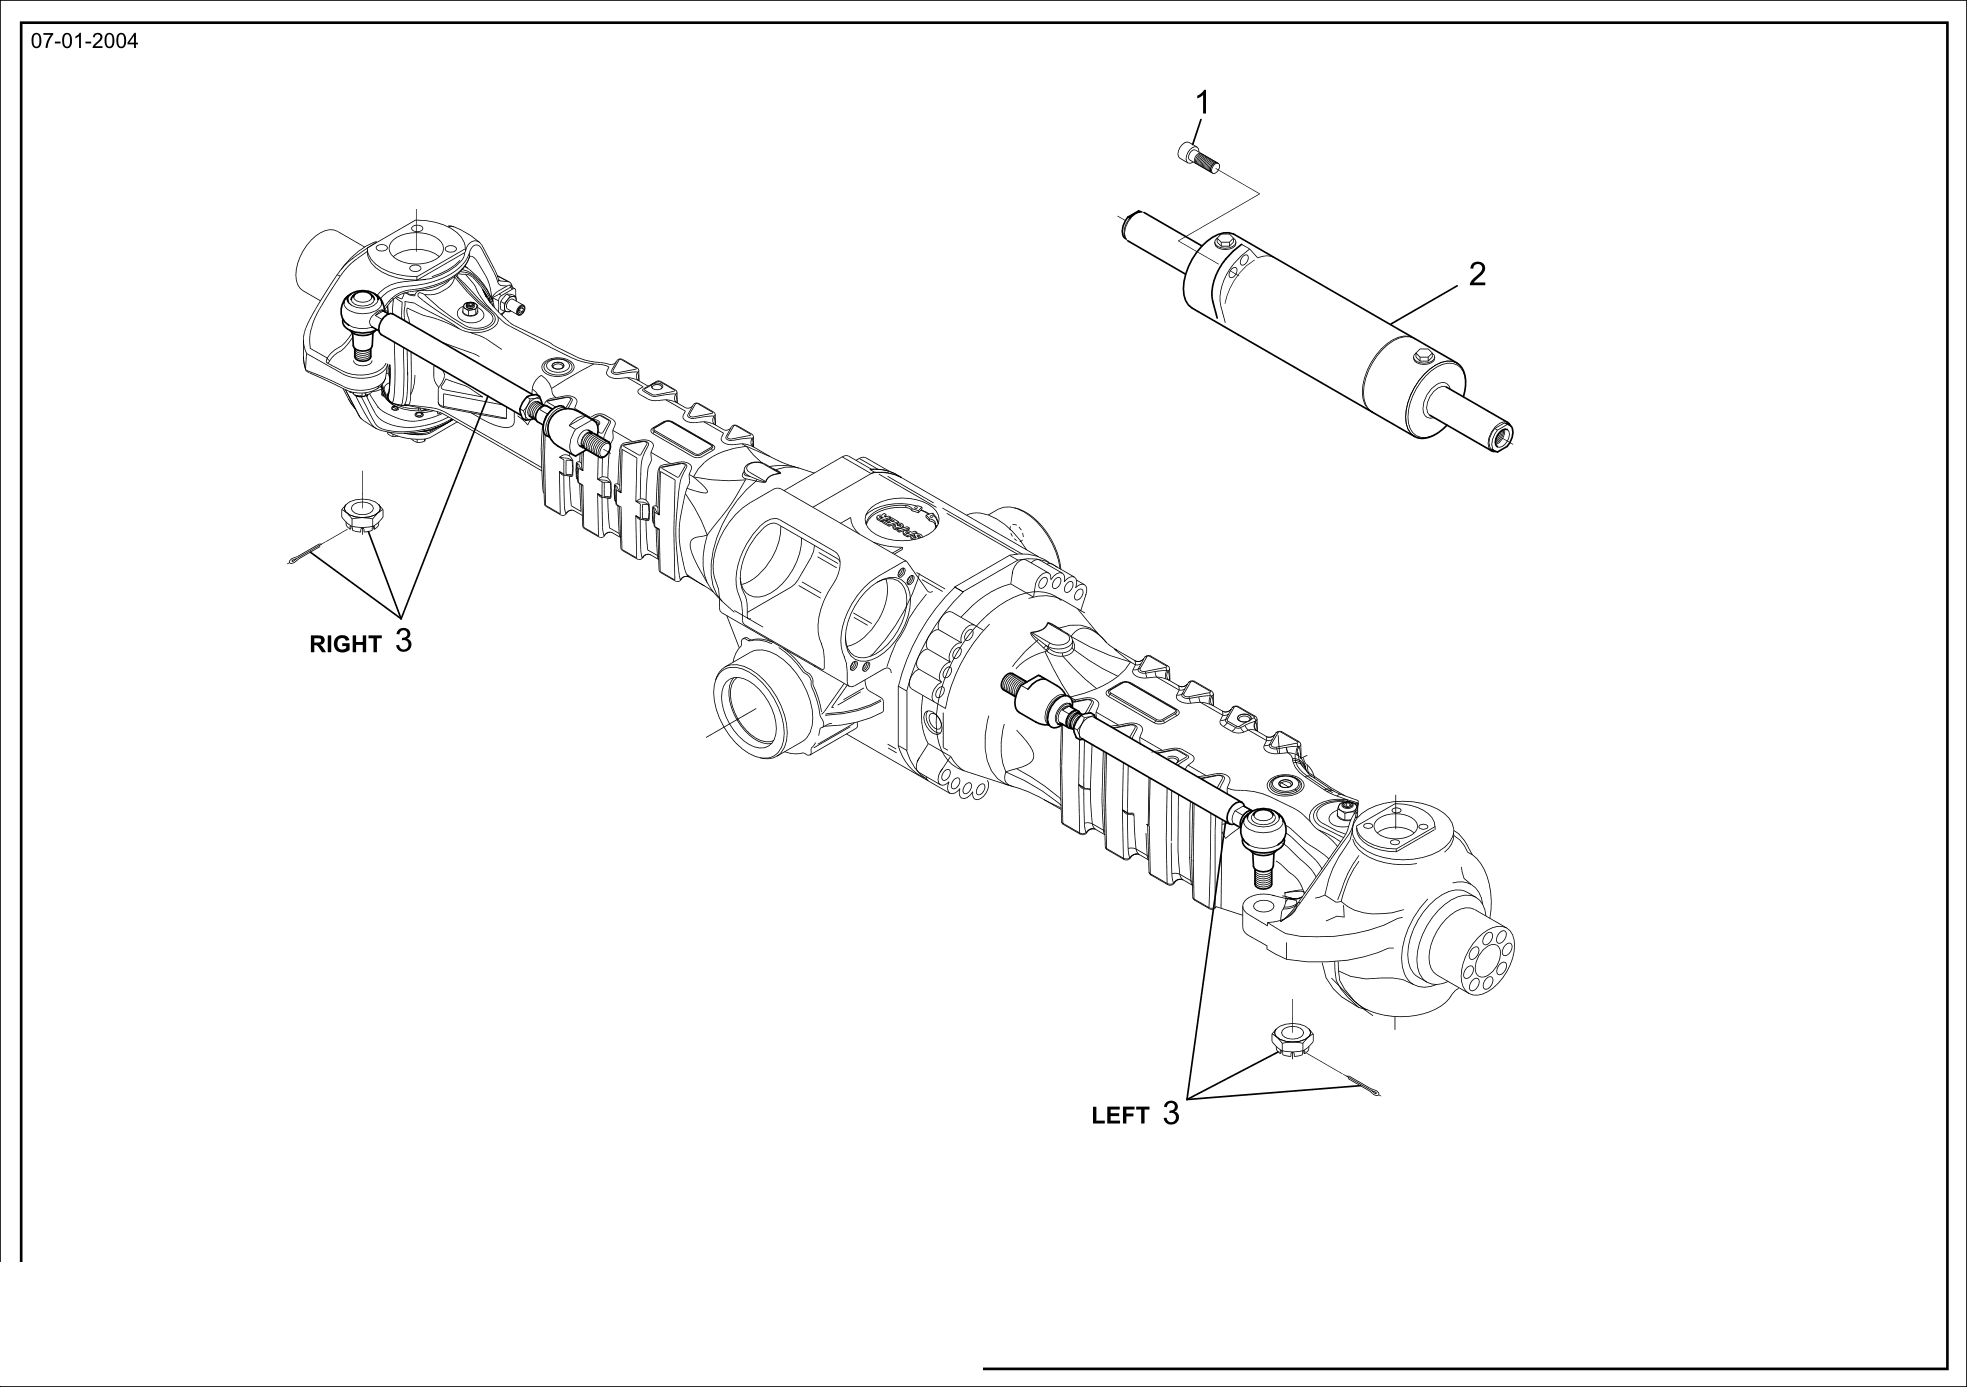 drawing for CNH NEW HOLLAND 71439518 - ARTICULATED TIE ROD (figure 5)